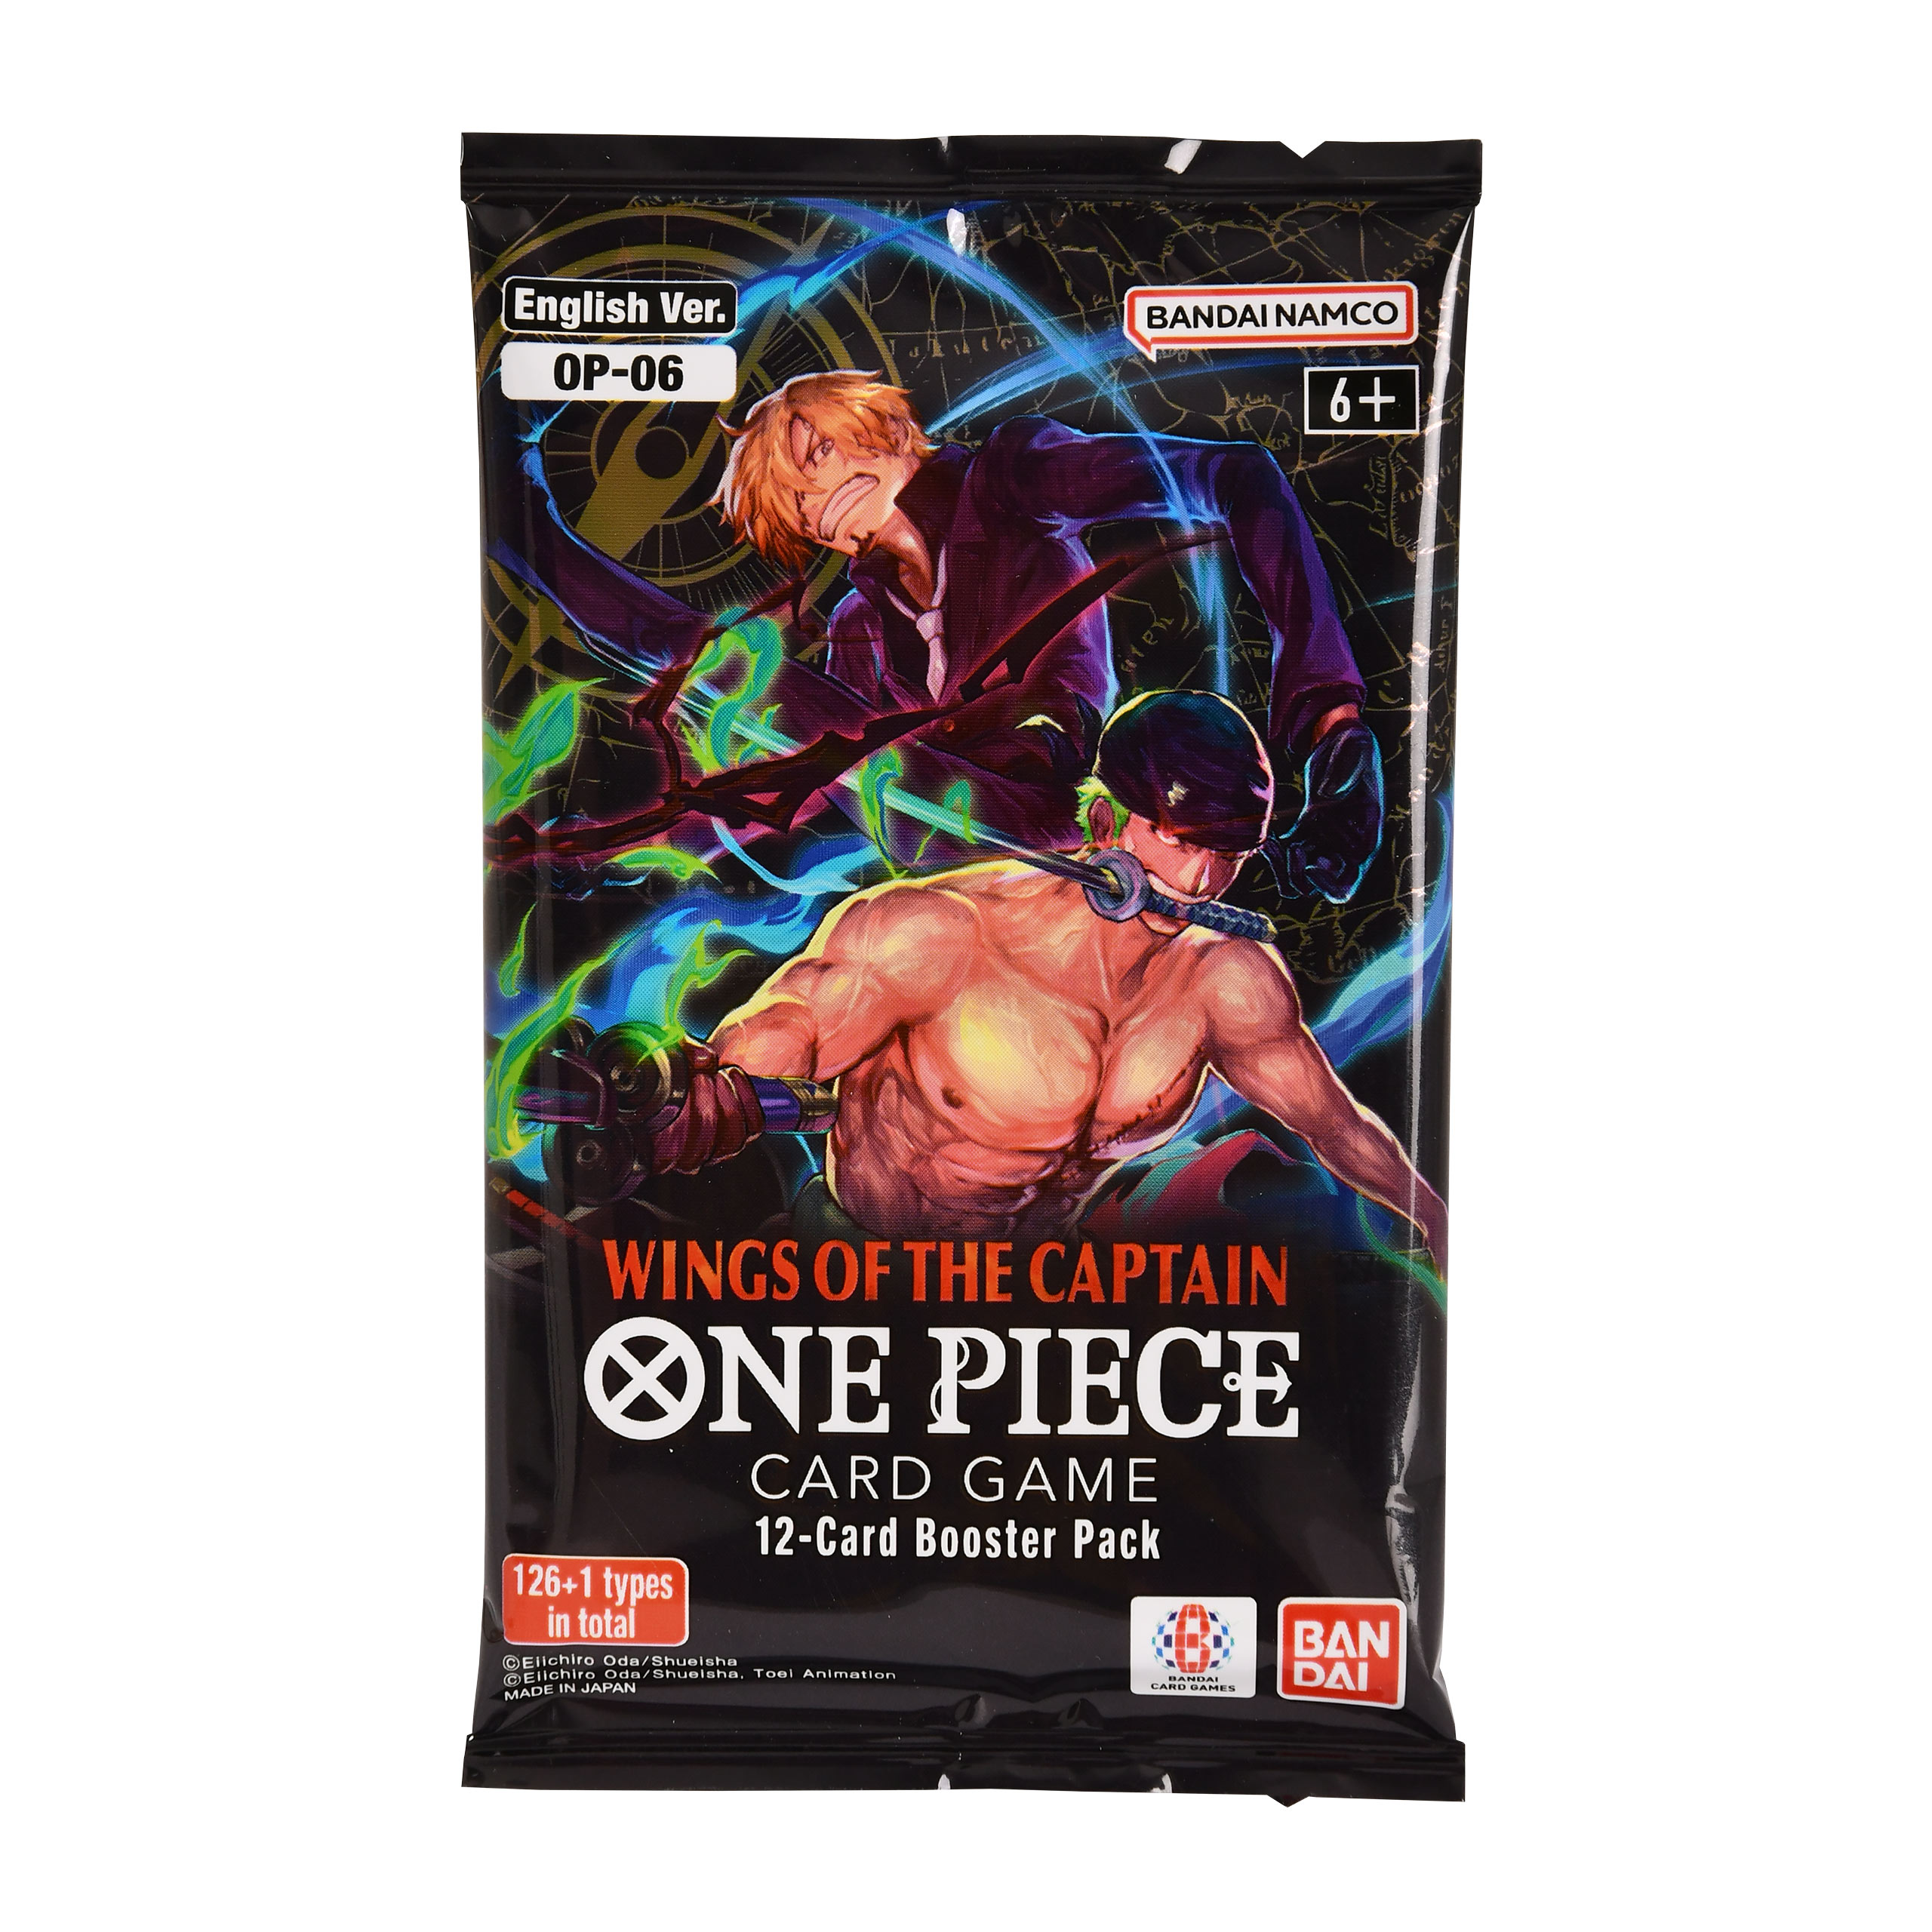 One Piece Card Game - Wings of the Captain Sammelkarten Booster